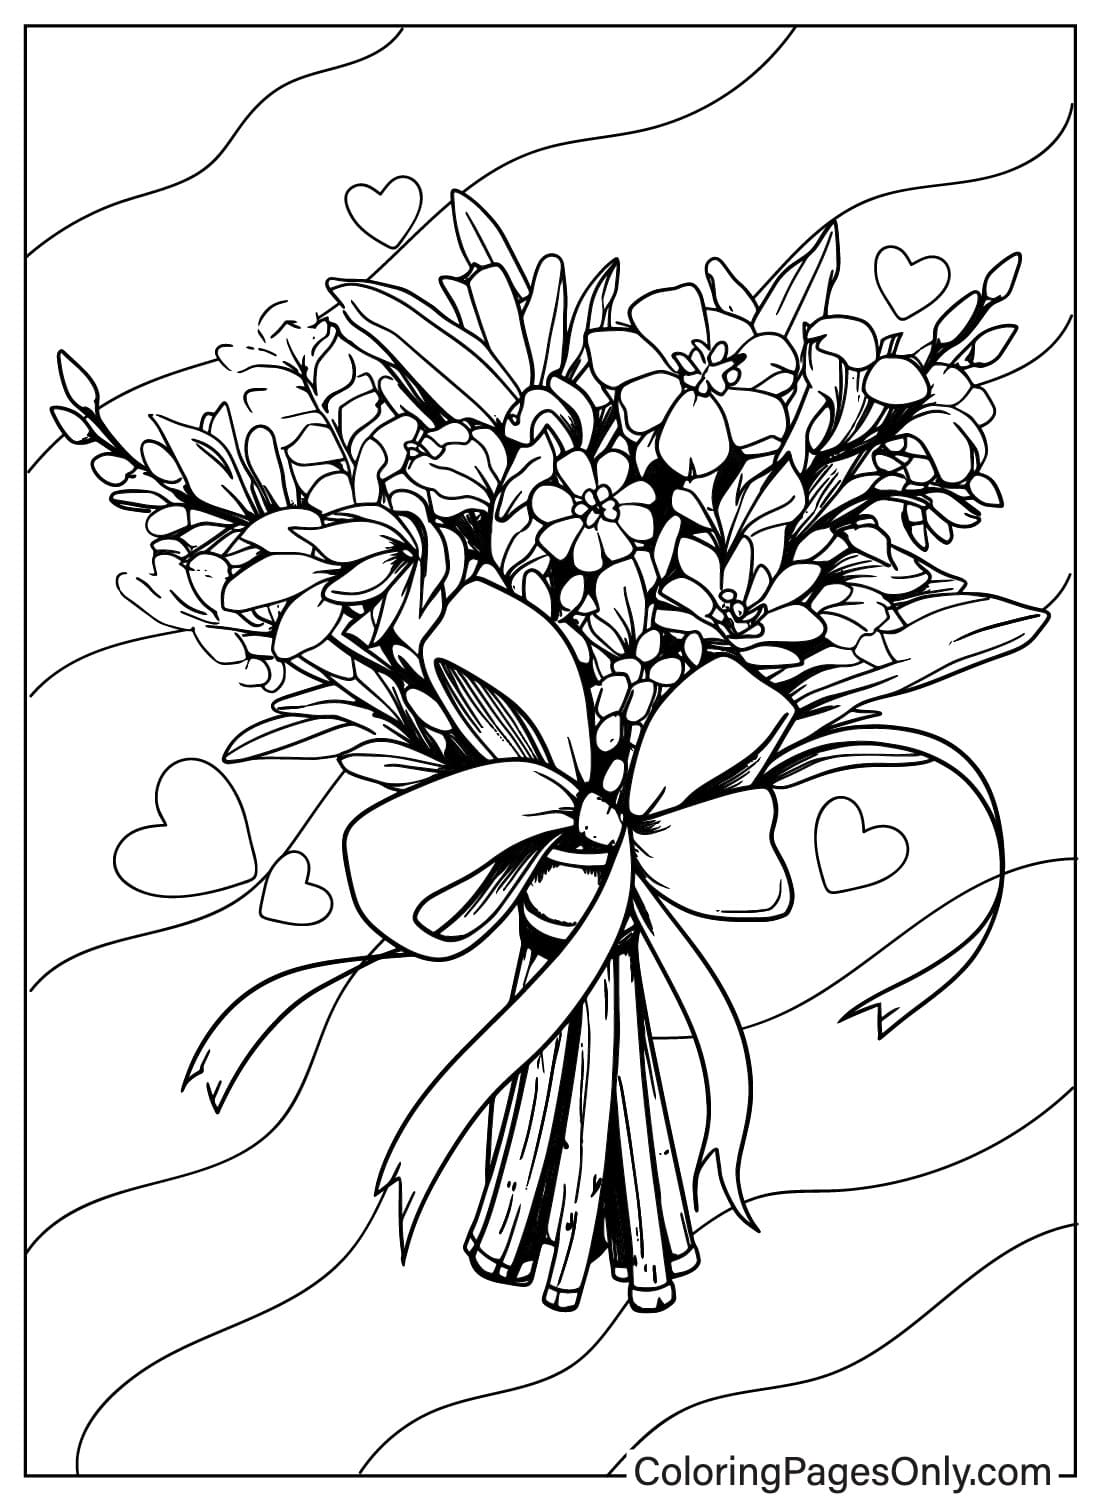 Coloring Page Flower Bouquet from Flower Bouquet